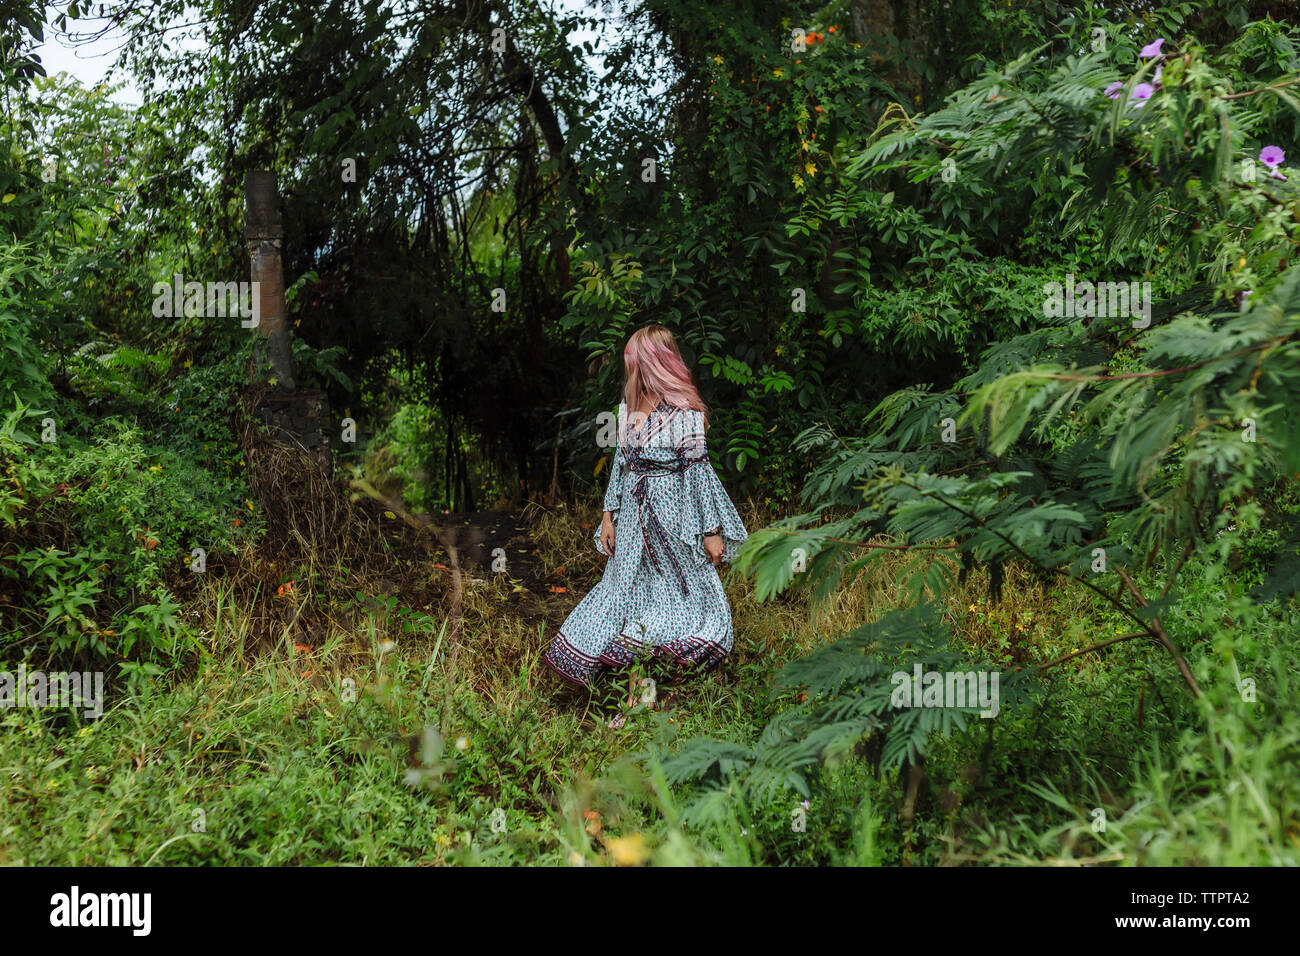 Woman in dress walking at forest Stock Photo